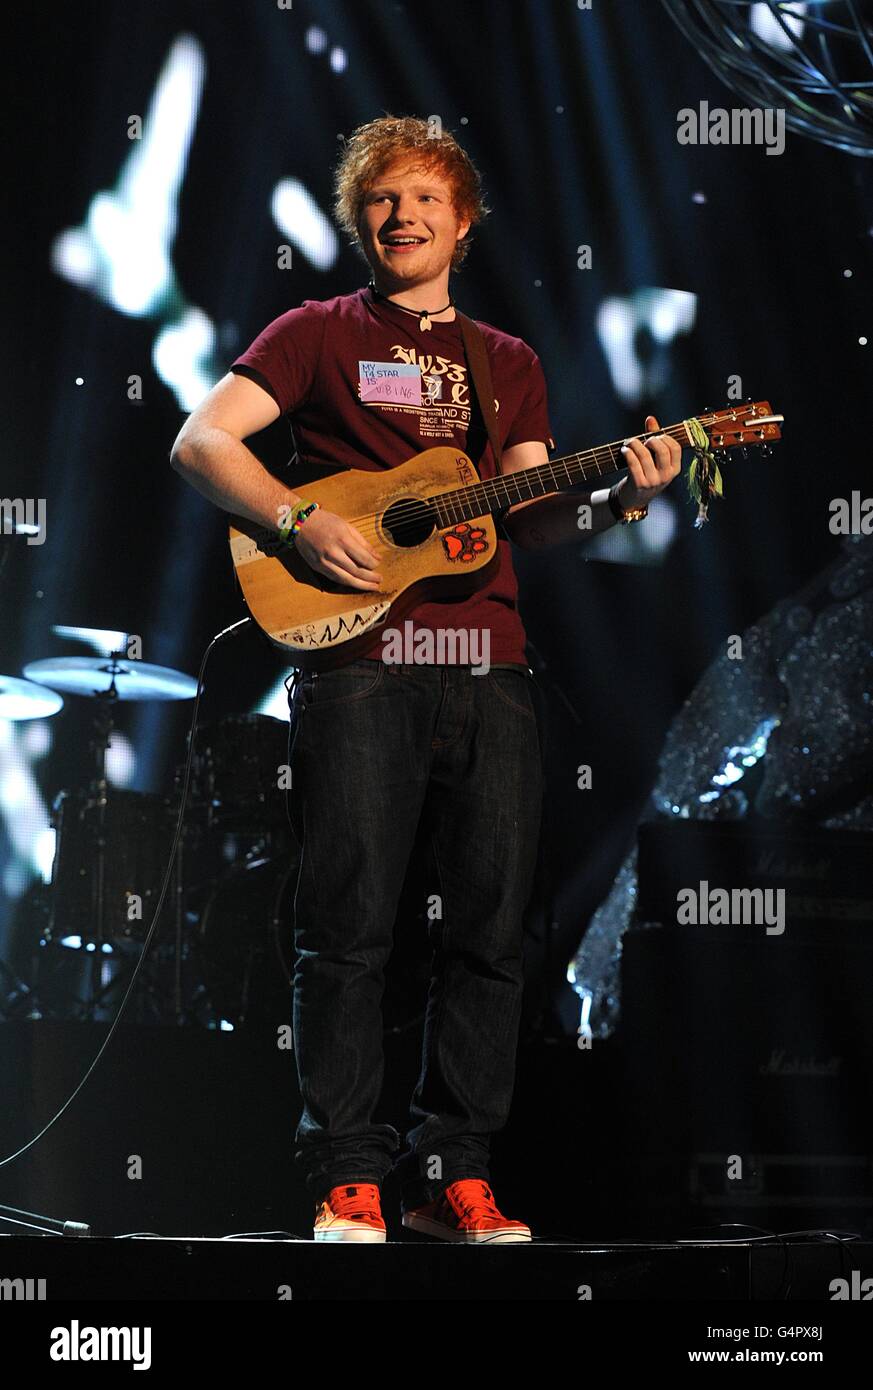 T4 Stars Of 2011 - London. Ed Sheeran performing during T4's Stars of 2011 event, at Earls Court, London. Stock Photo